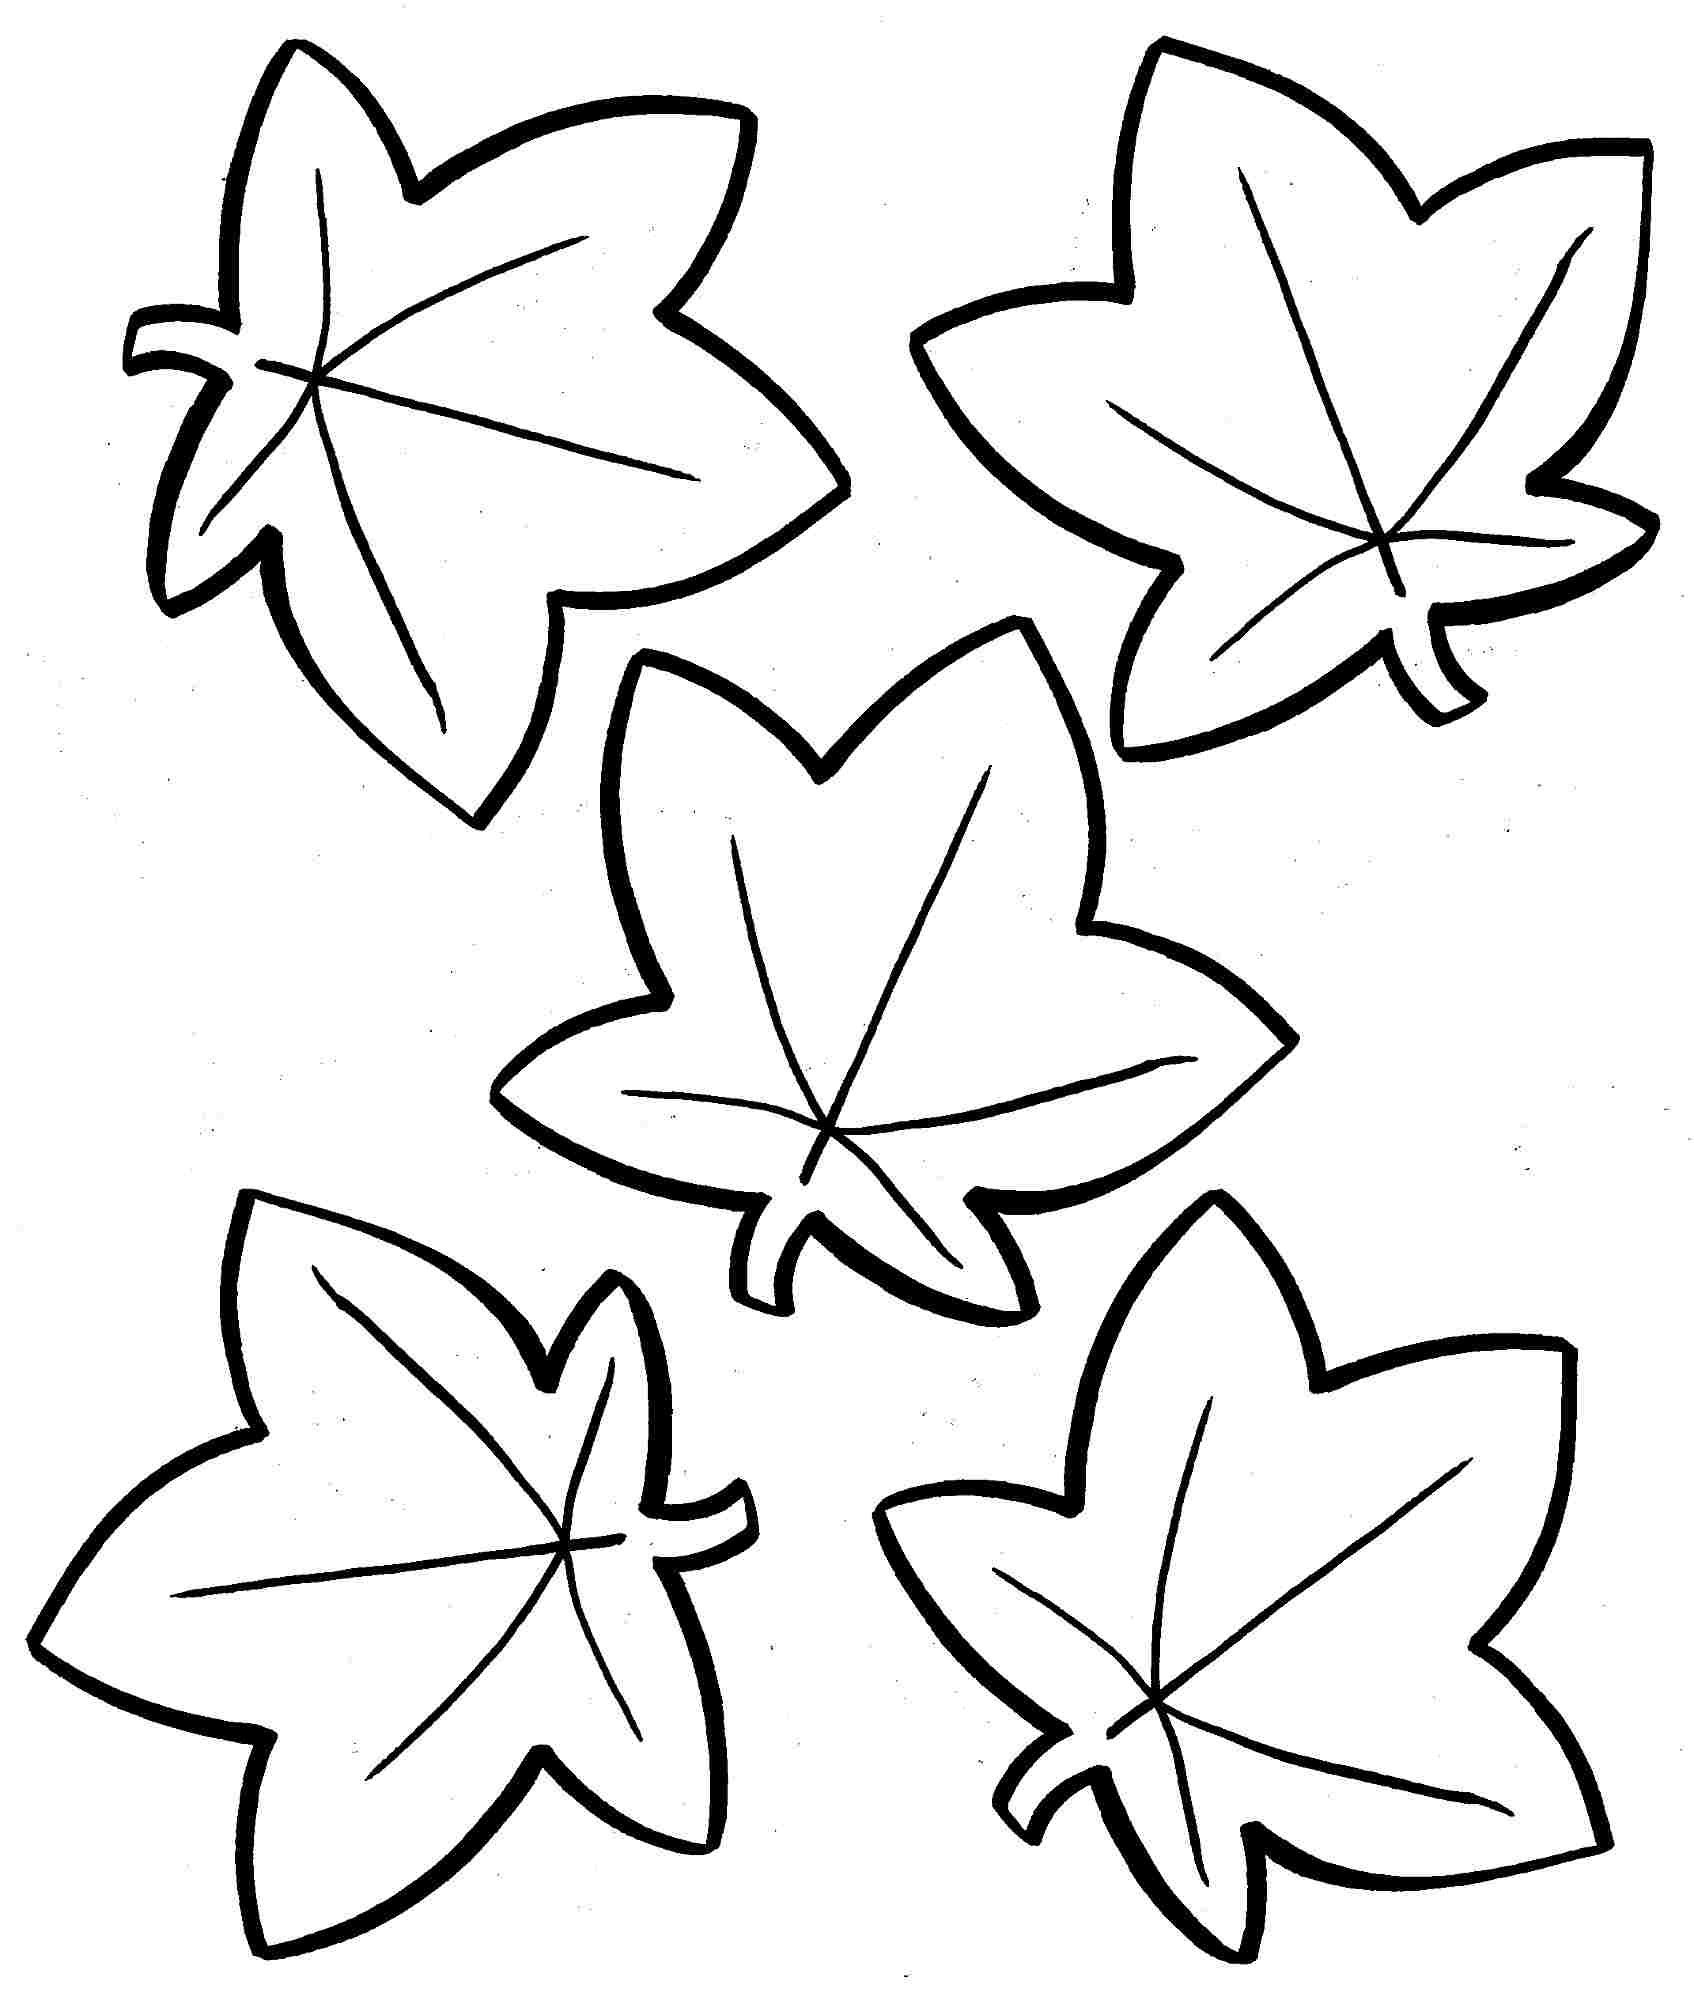  Autumn Leaves Printable Coloring Pages Free Download Gambr co